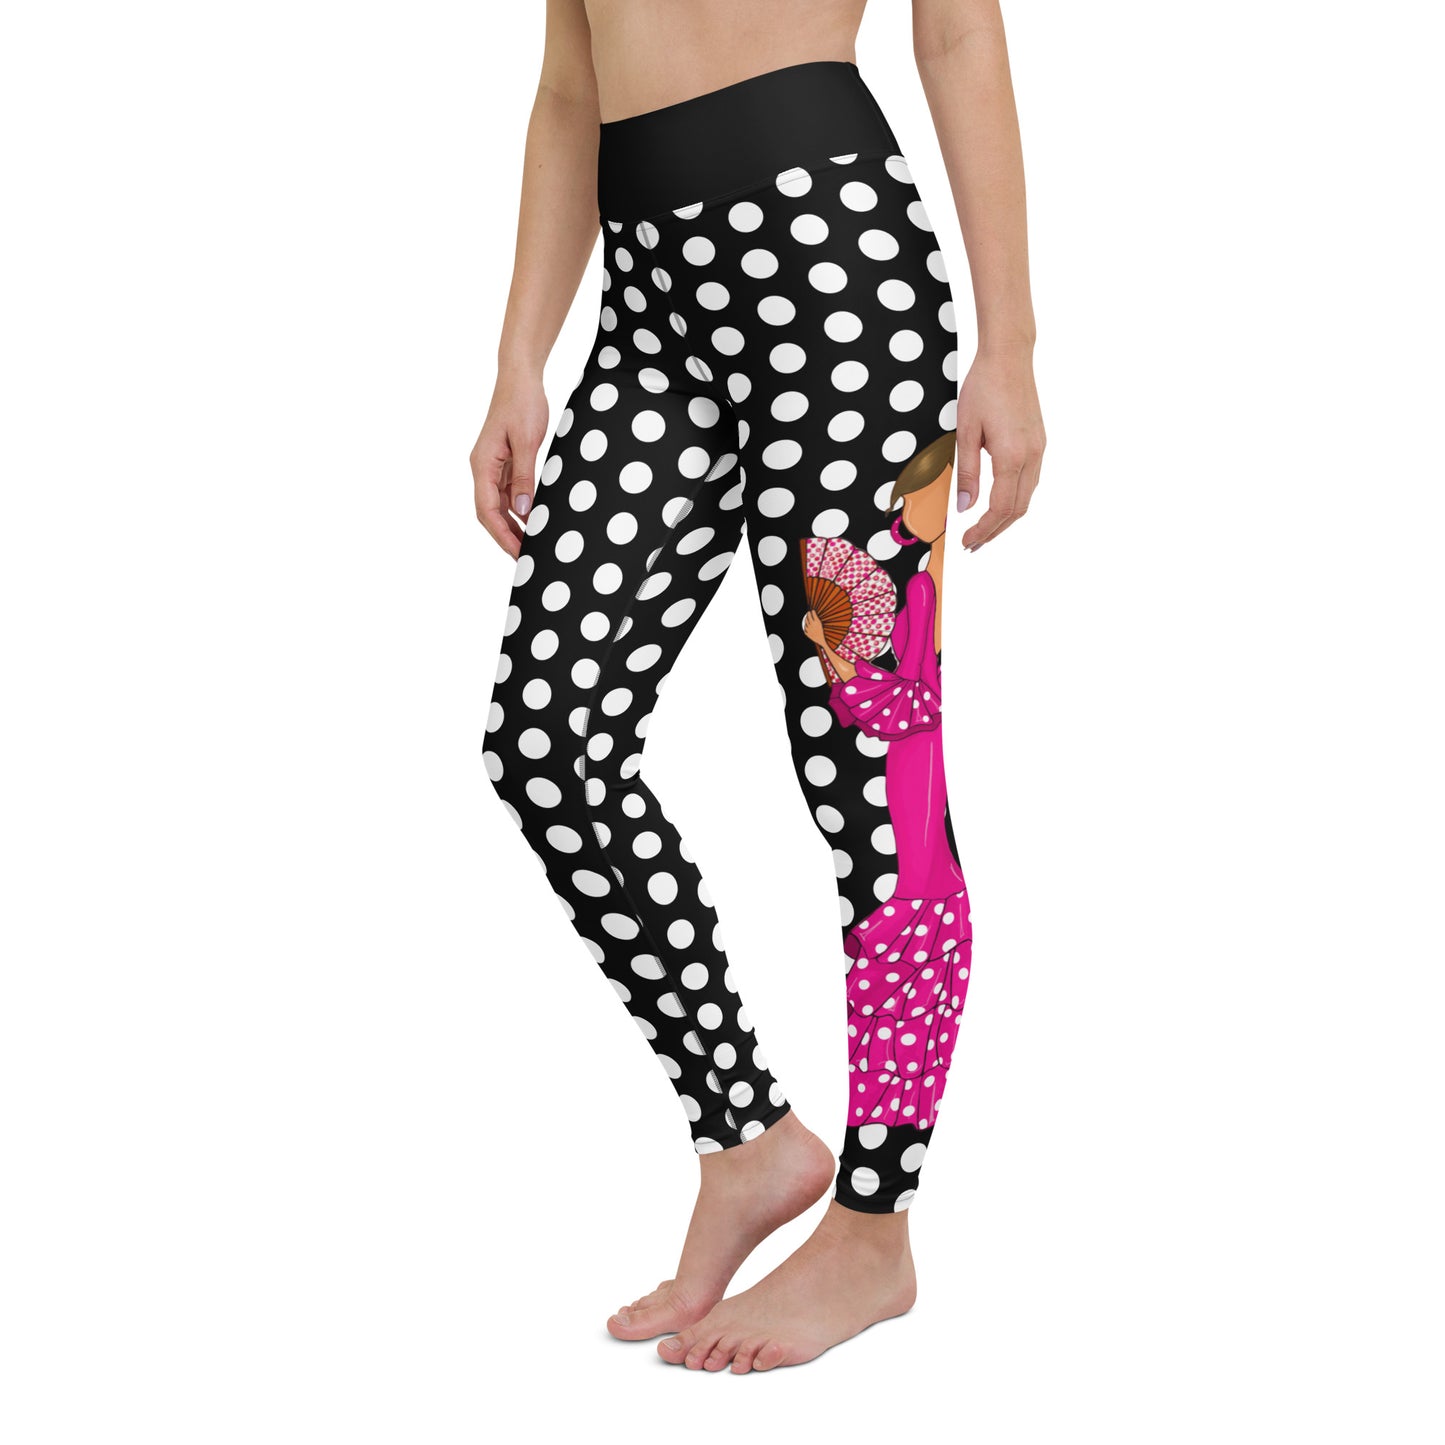 a women's leggings with polka dots and a pink bow